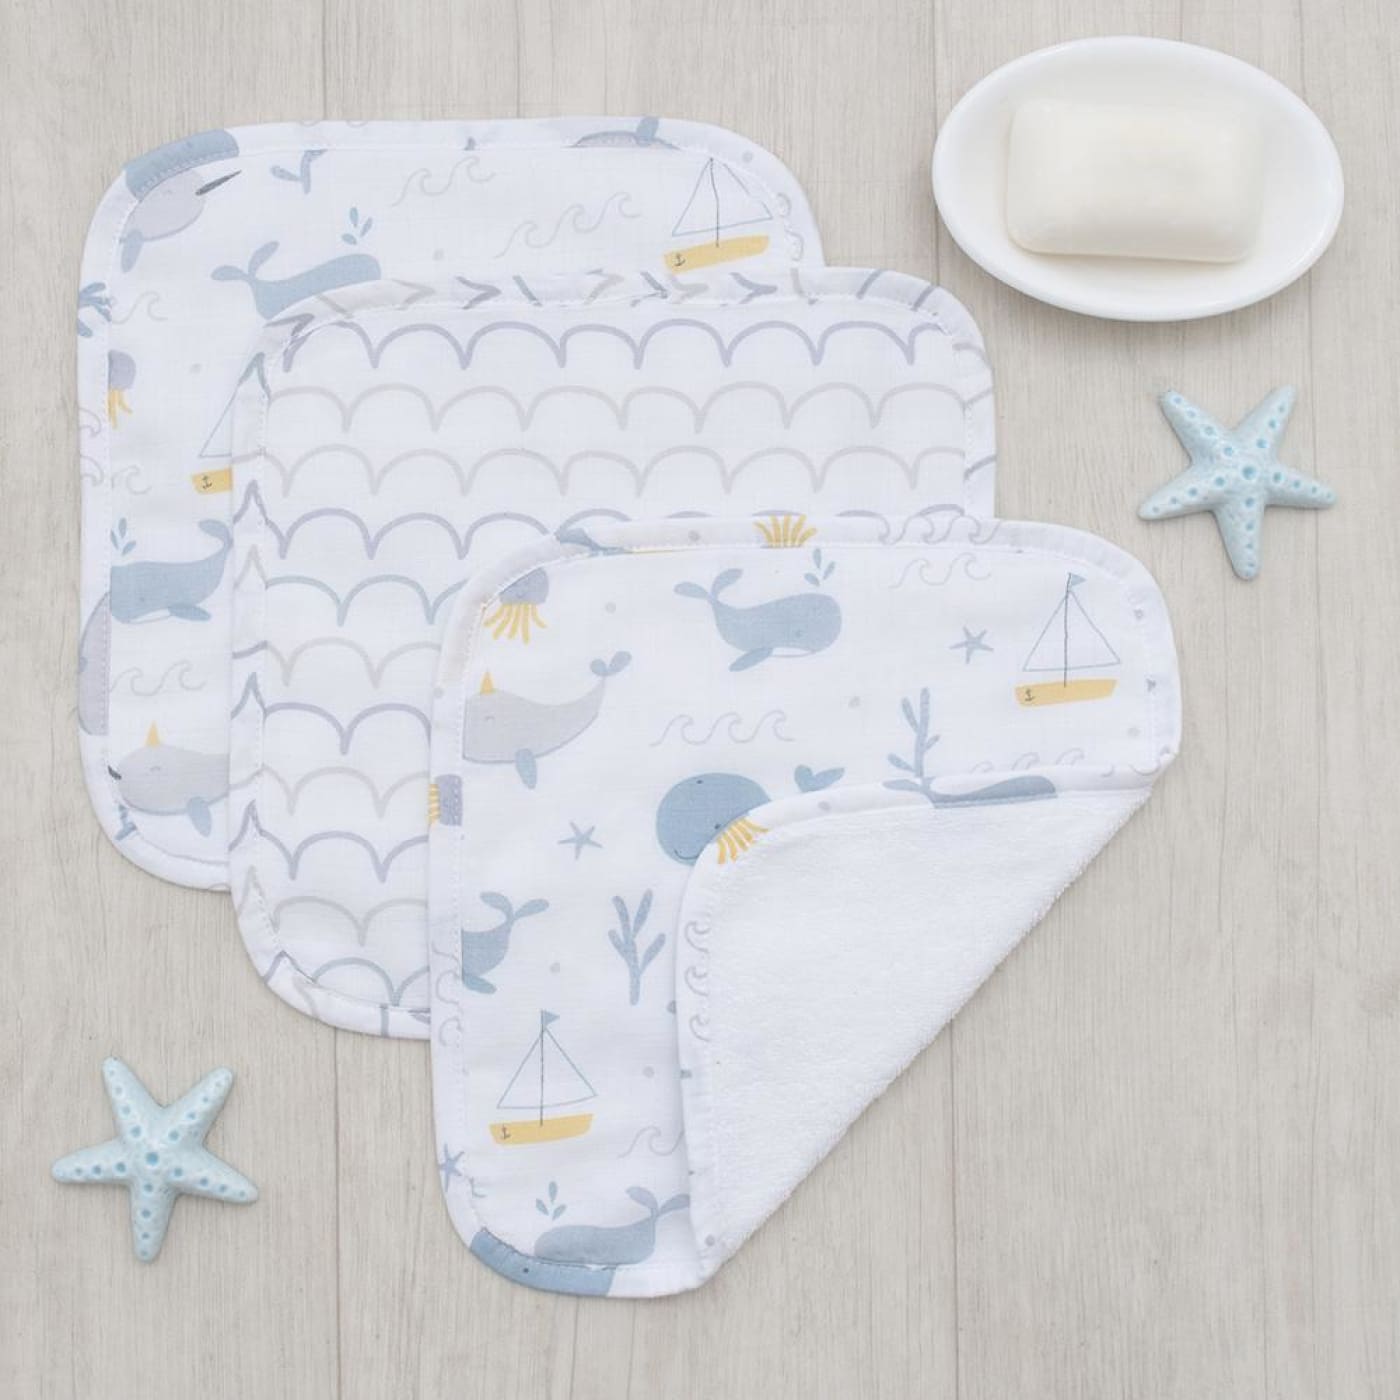 Living Textiles Little Dreamer Muslin 3pk Wash Cloths - Whale of a Time - Whale of a time - BATHTIME & CHANGING - TOWELS/WASHERS